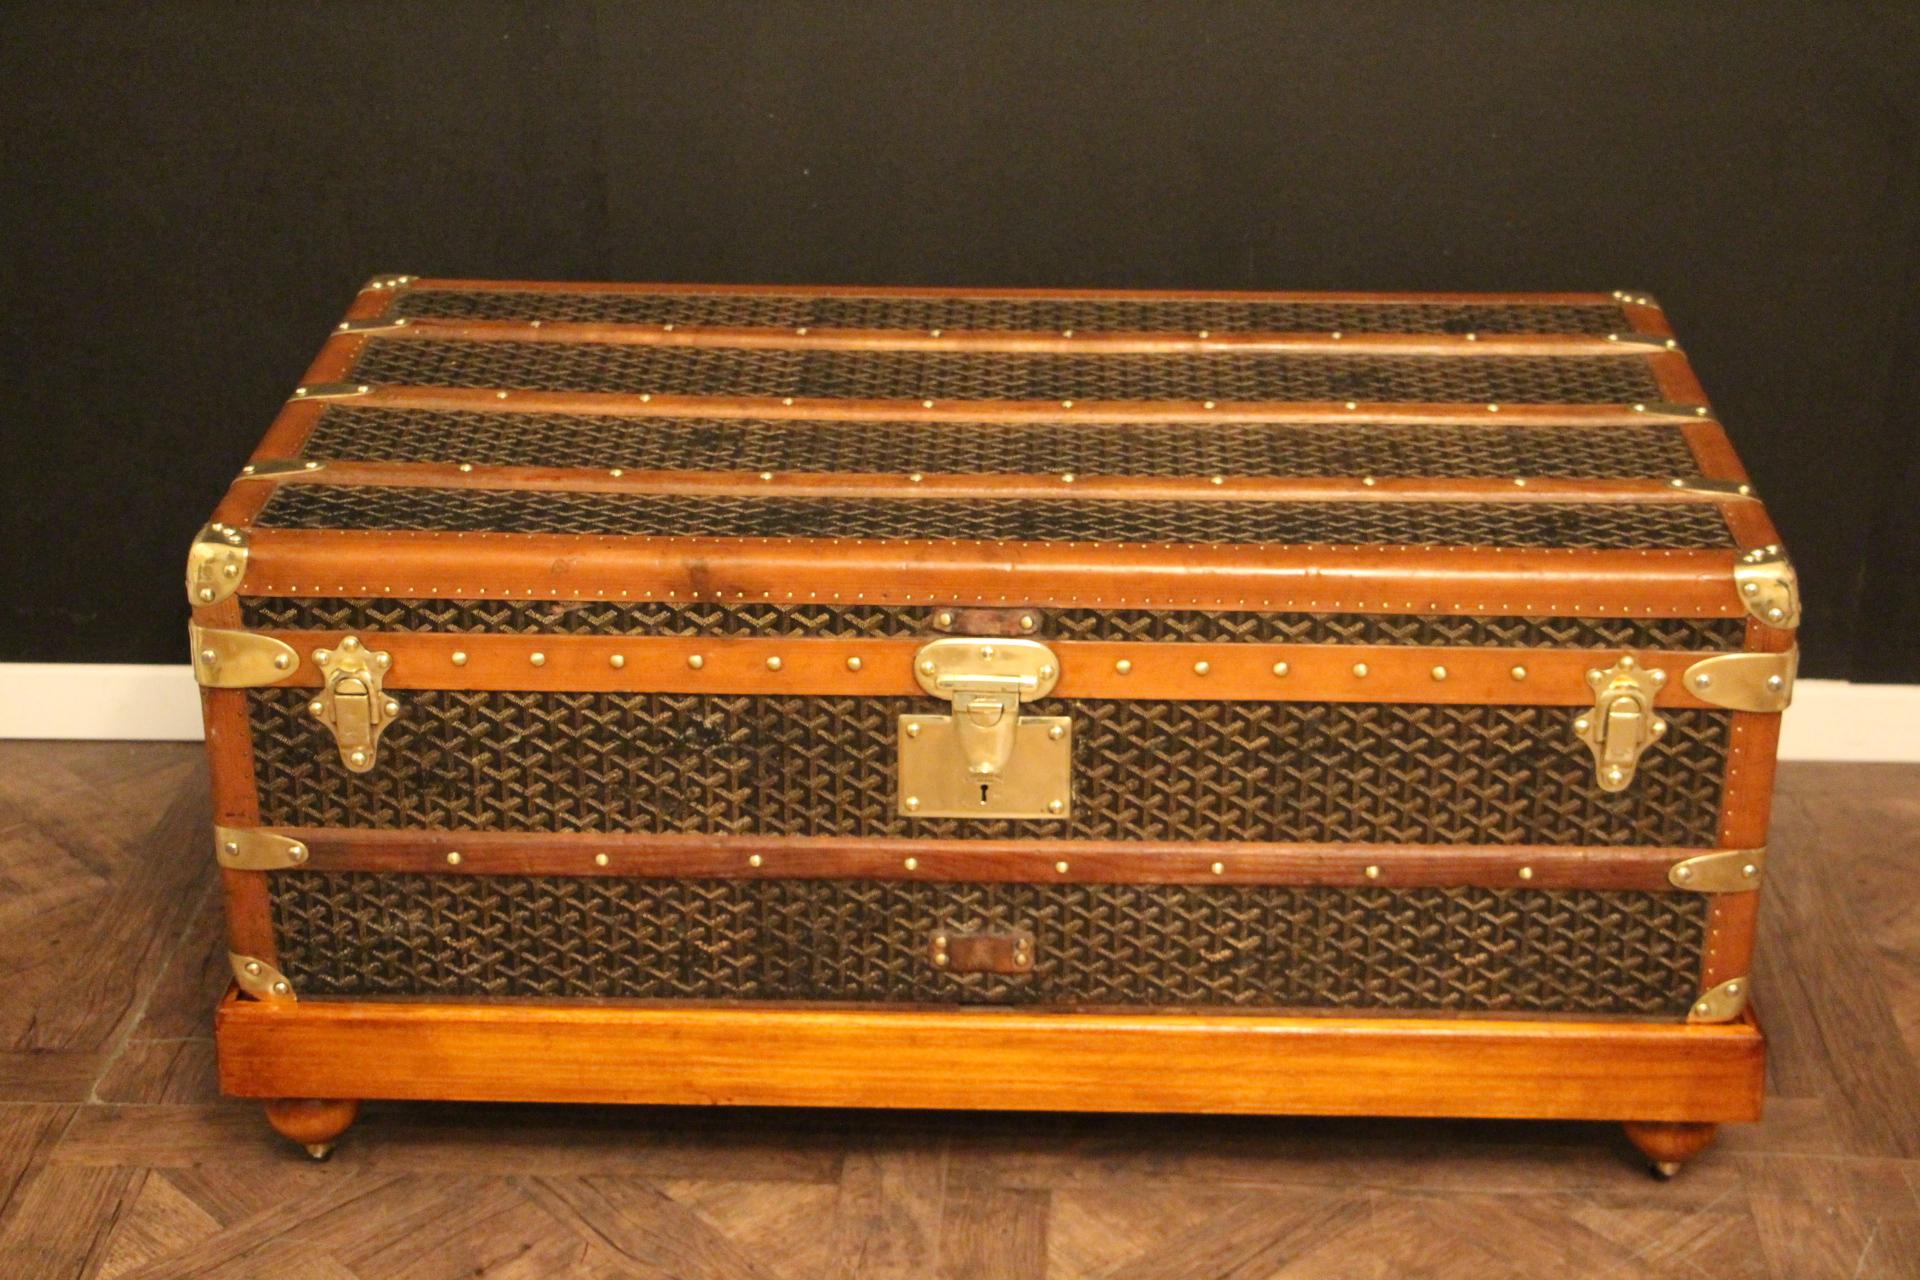 This Goyard steamer trunk features the very sought after chevrons canvas as well as all solid brass fittings: Goyard marked side handles and locks. Goyard plaques on each side. Brass studs. Many wood slats. Beautiful and rich patina. Customized